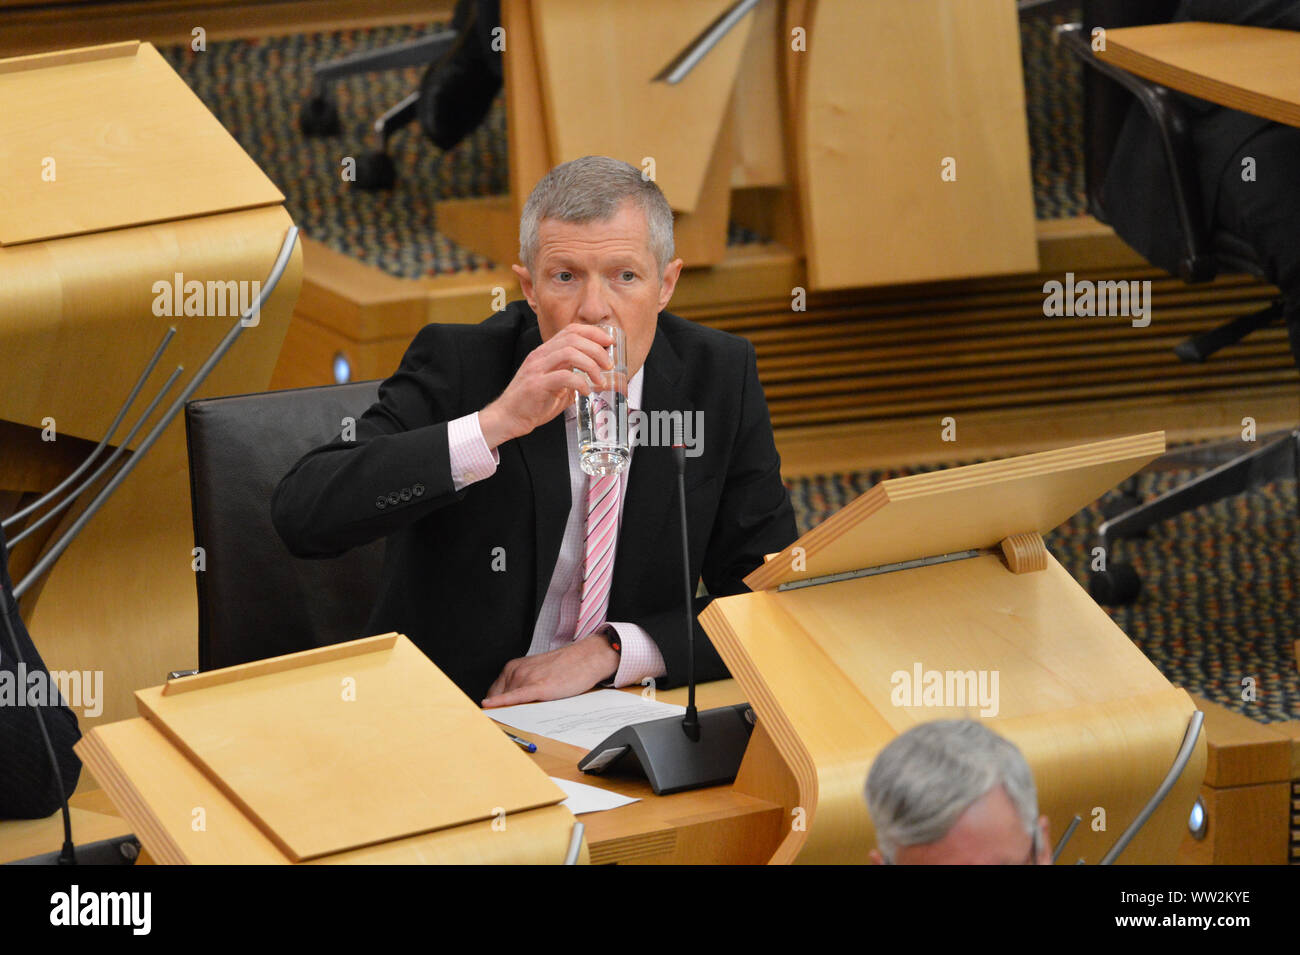 Edinburgh, UK. 12th Sep, 2019. Pictured: Willie Rennie MSP - Leader of the Scottish Liberal Democrat Party. Weekly session of First Ministers Questions as the Scottish Parliament tries to steer a path through the fallout of the latest Brexit mess and prevent Scotland from leaving the EU. Credit: Colin Fisher/Alamy Live News Stock Photo